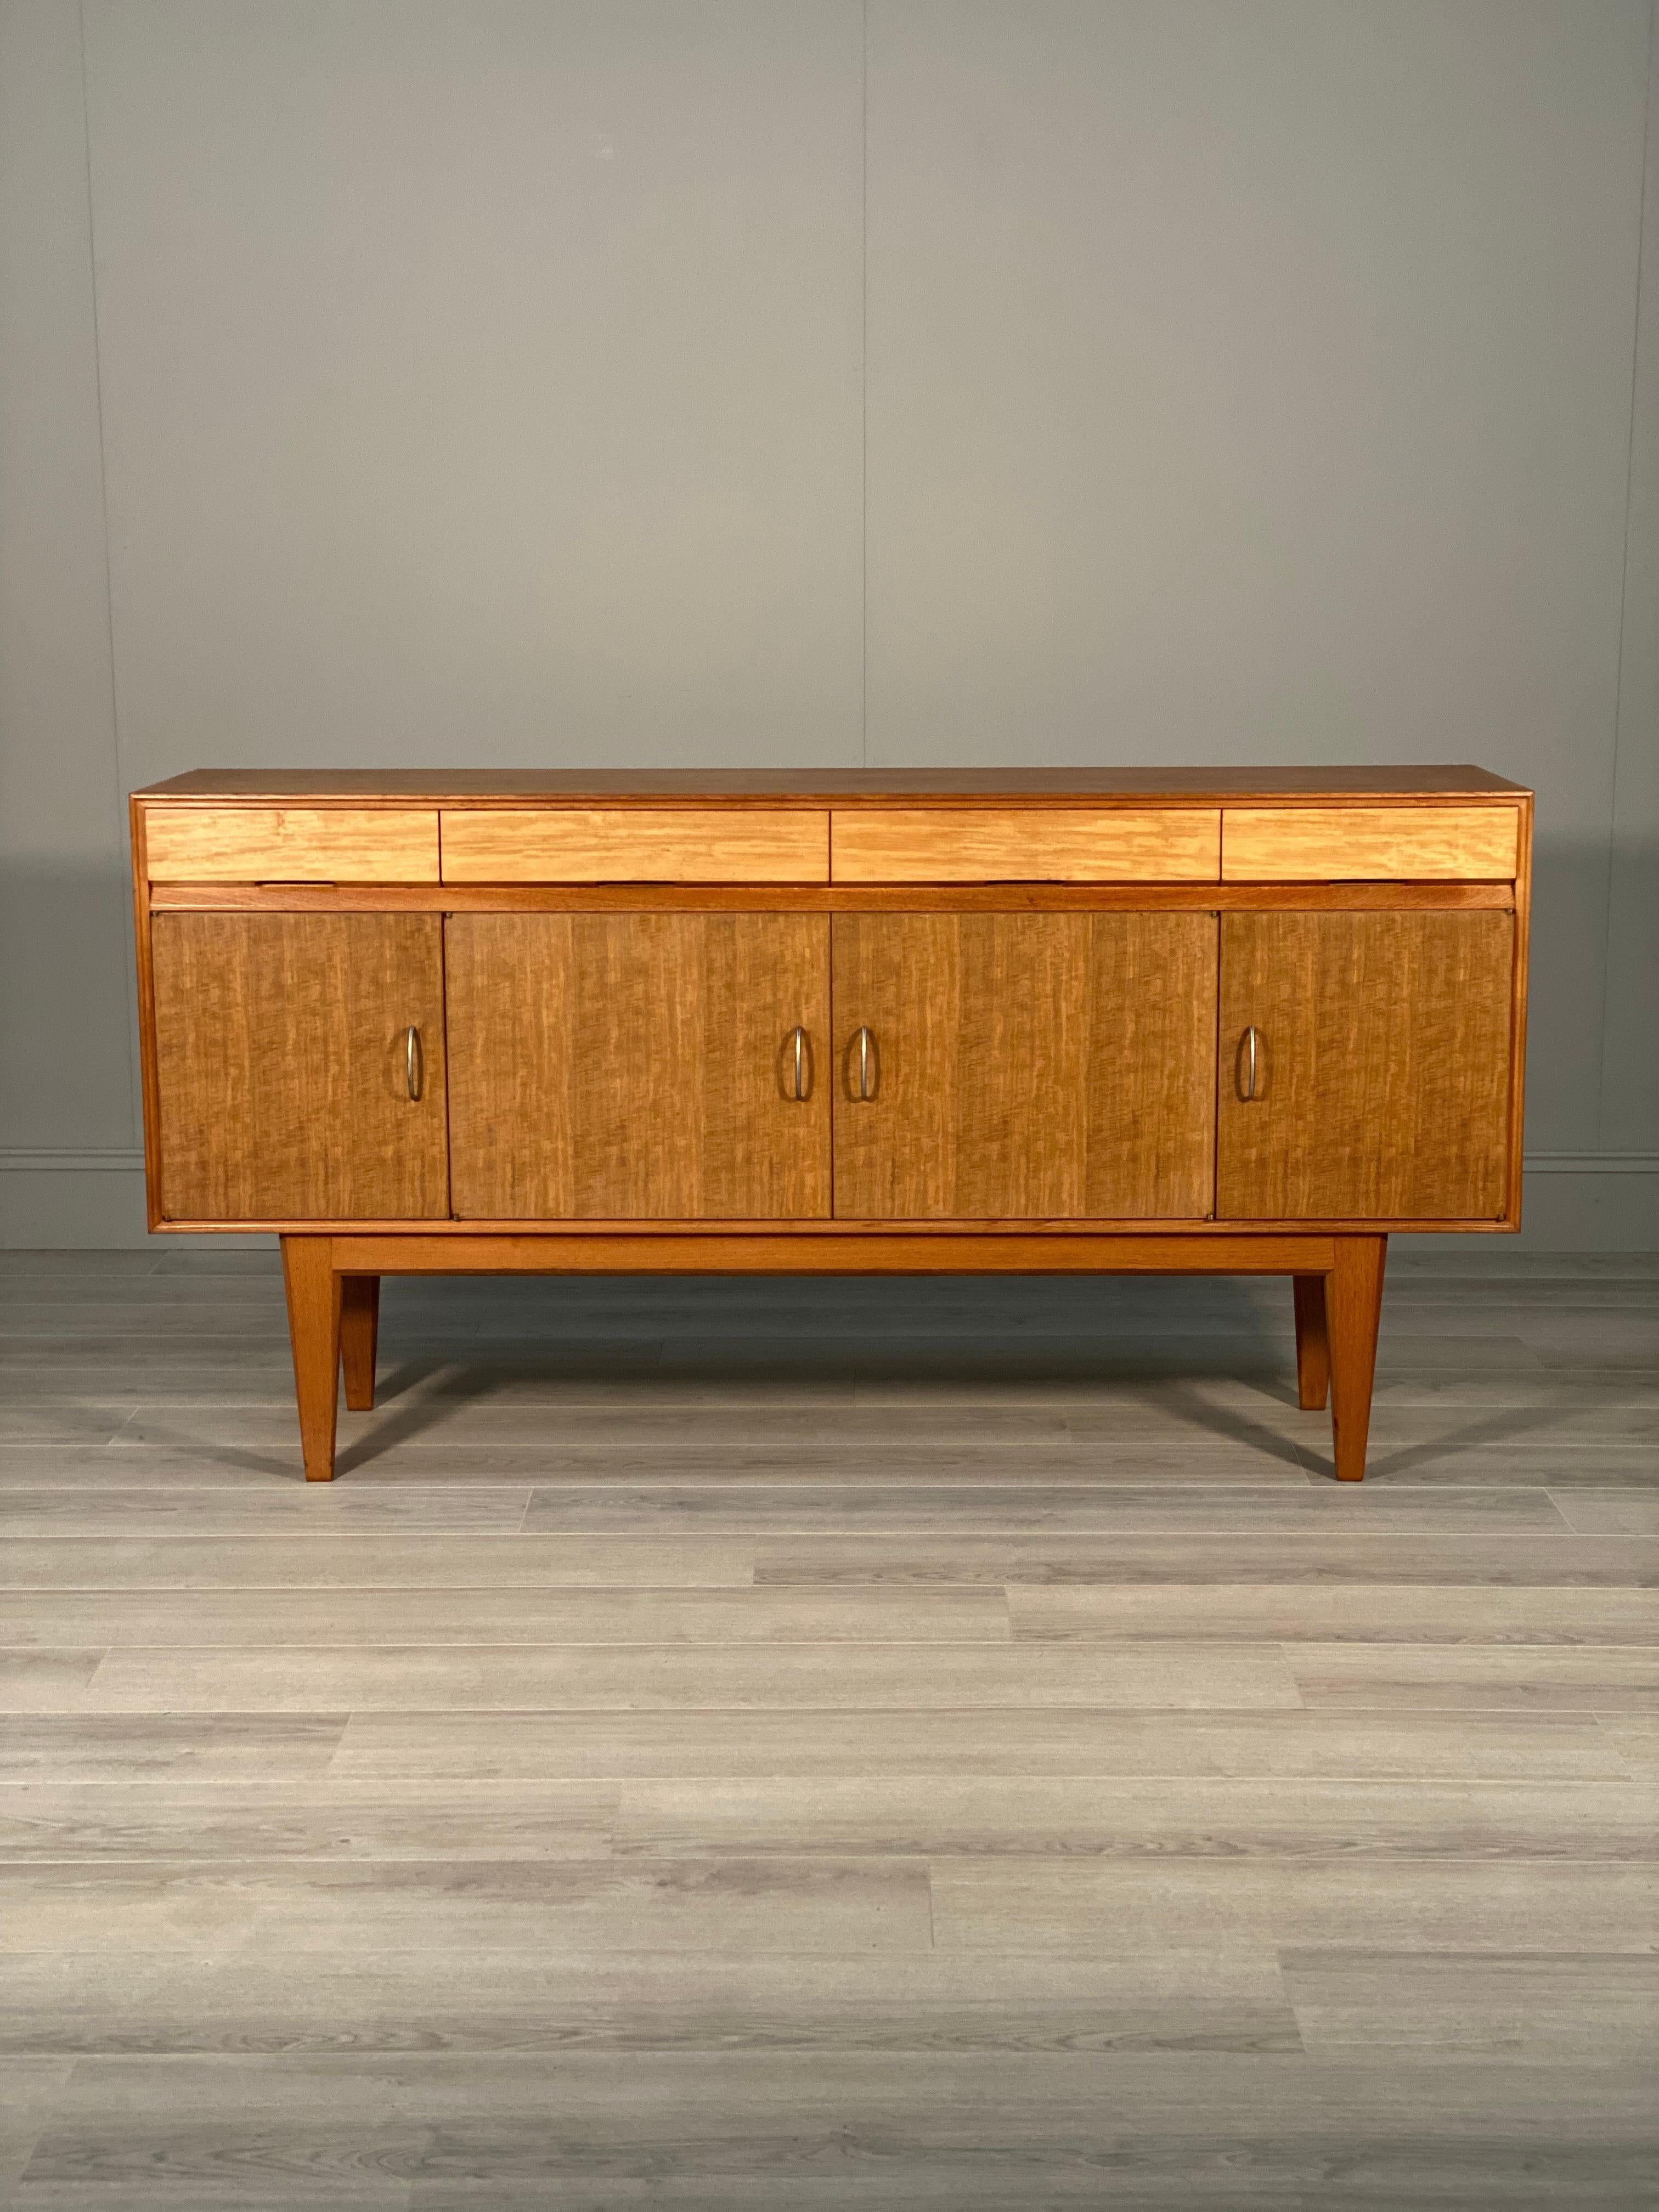 A rare Gordon Russell sideboard dating to the 1950’s. The sideboard is made from a multiple of different woods with a teak body, ebony cupboard doors and satin wood drawer fronts. In very good order with some slight age related wear.
